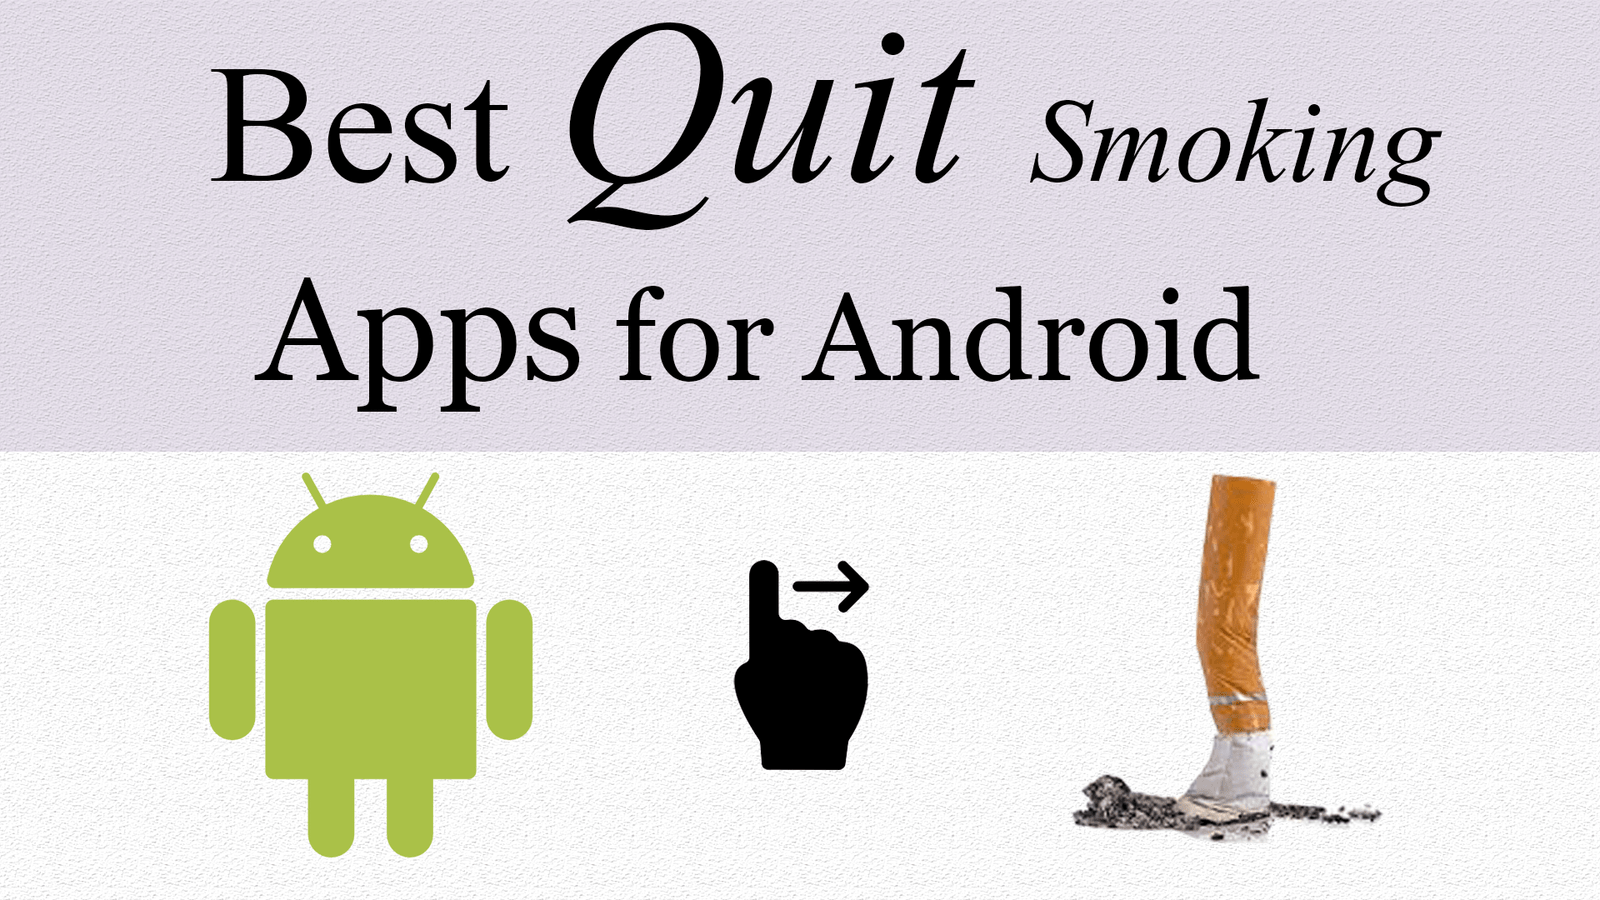 QUIT SMOKING APP FOR ANDROID